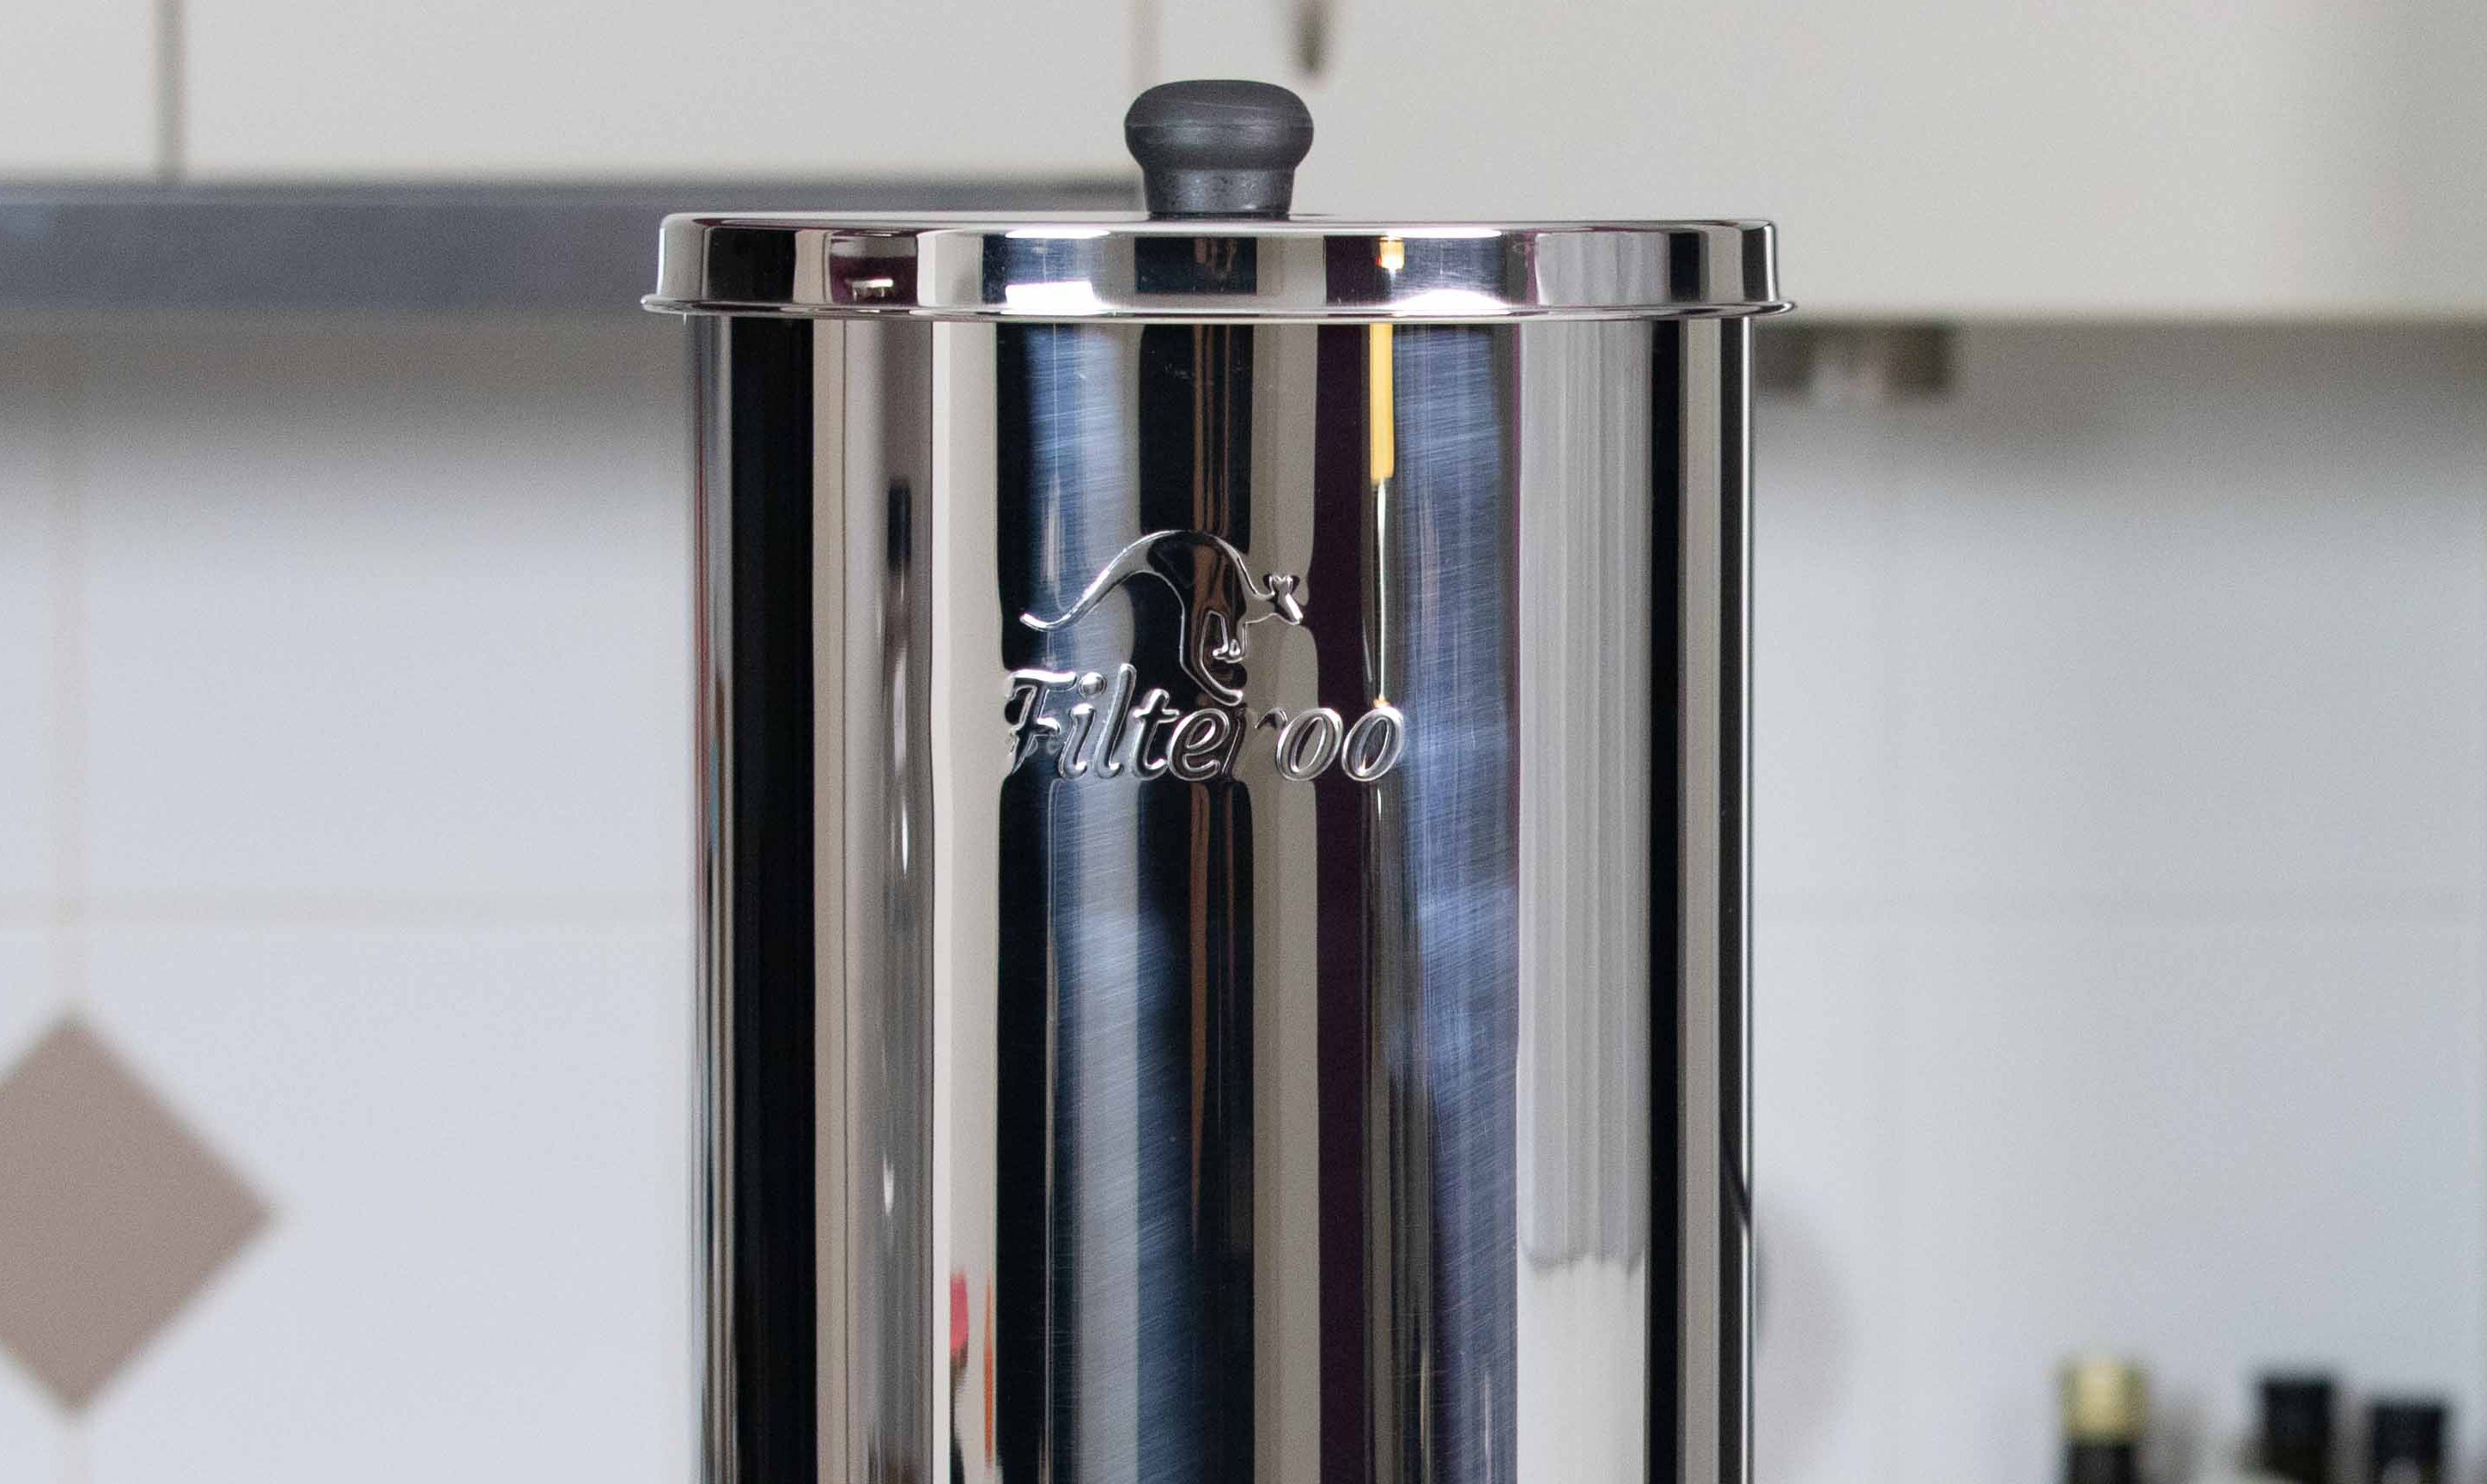 Filteroo® Superoo 16L Stainless Steel Gravity Water Filter with Grander Revitalised Structured Water